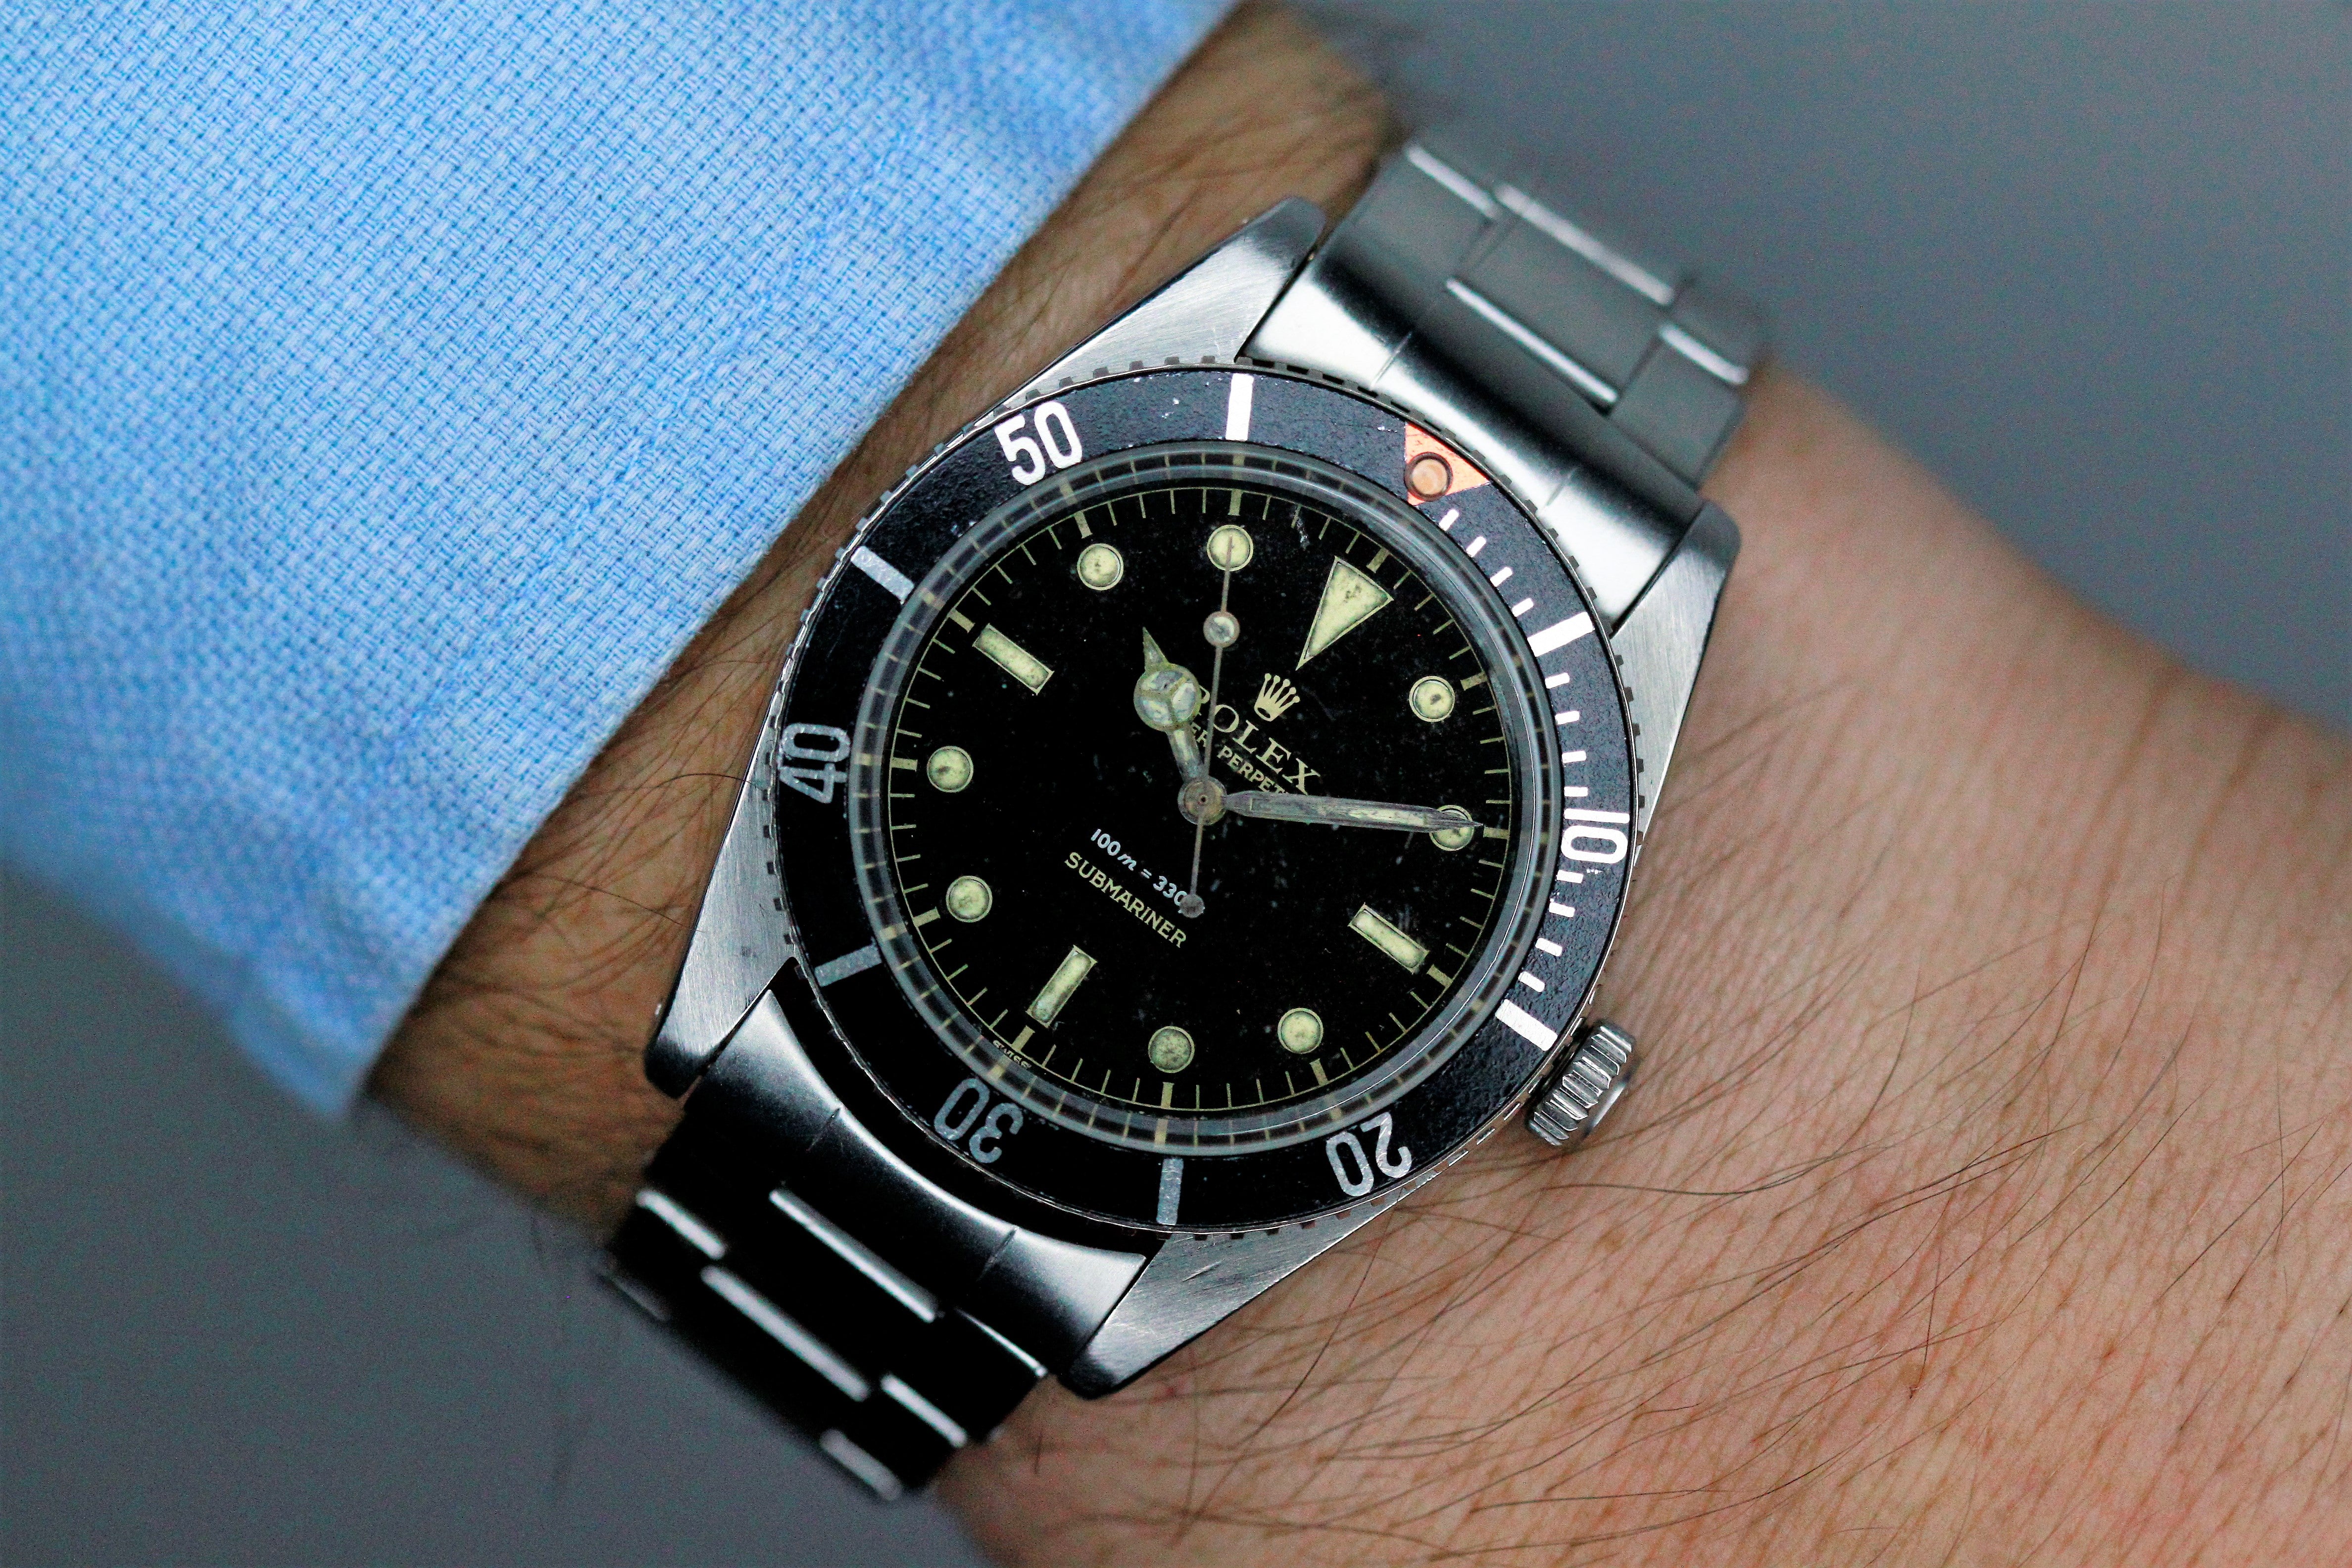 Rolex Oyster Perpetual Submariner Ref.5508 Small Crown from 1958